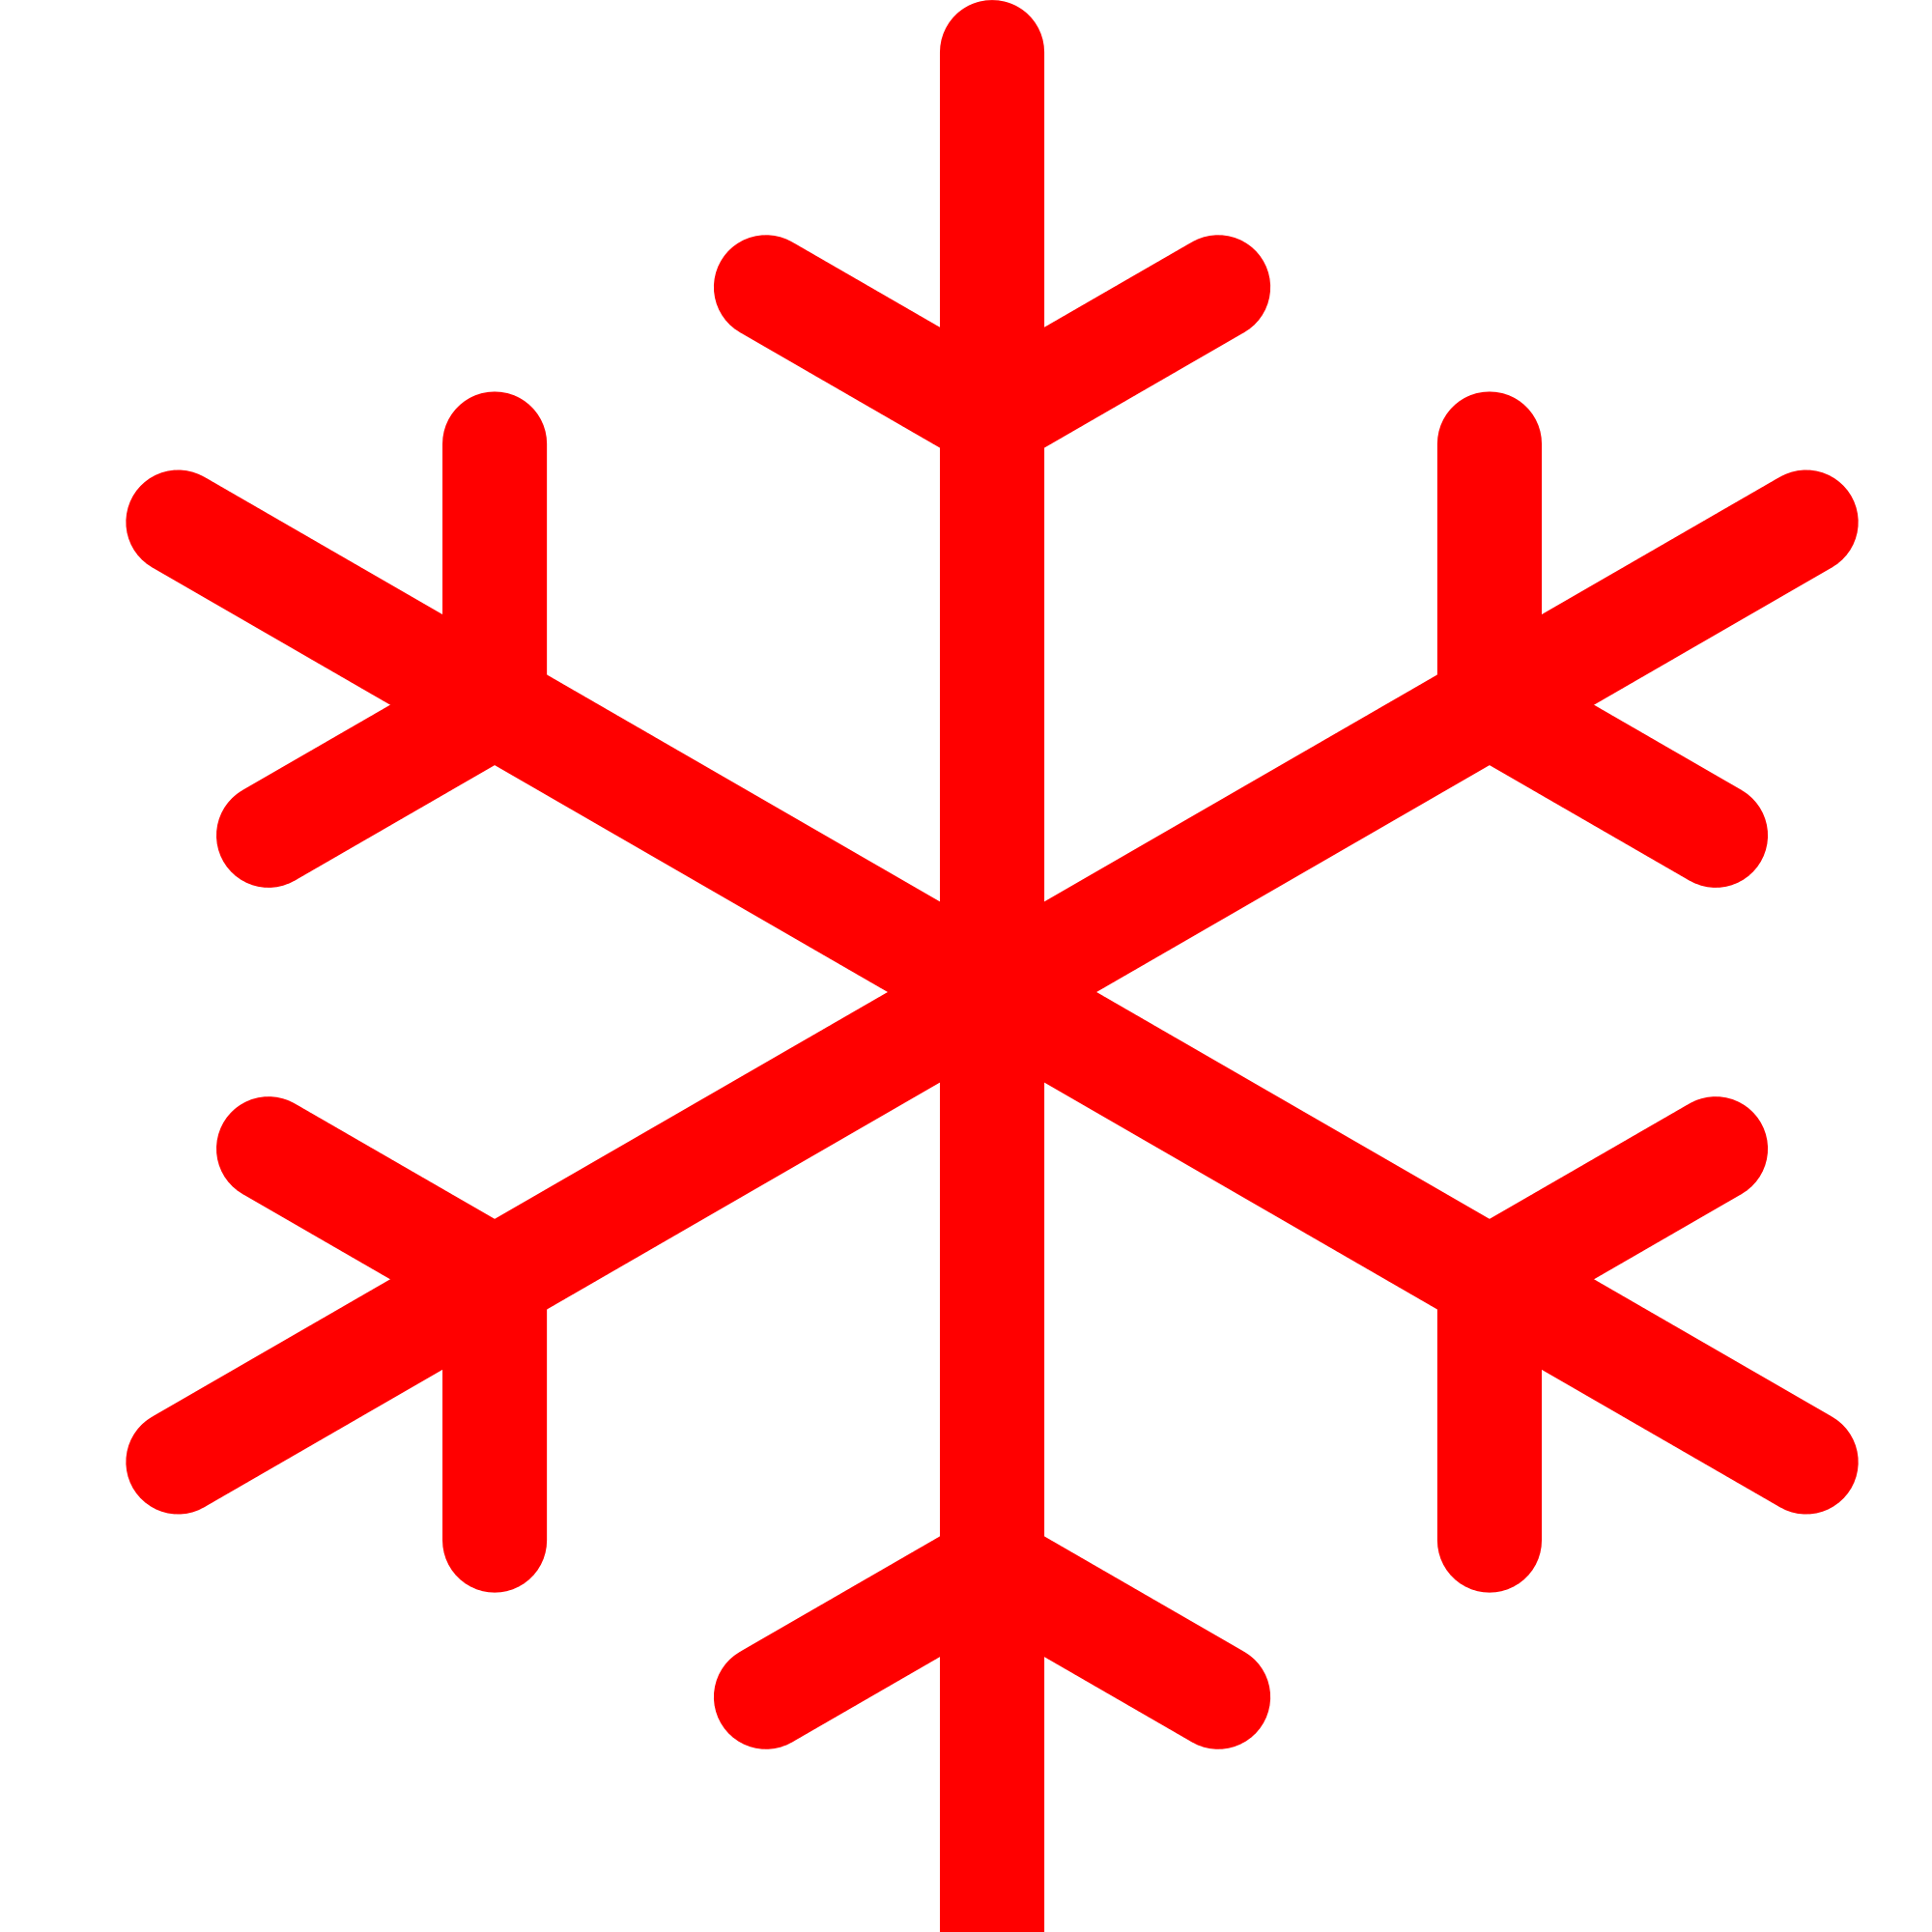 File:Snowflake SVG animation.svg - ClipArt Best - ClipArt Best